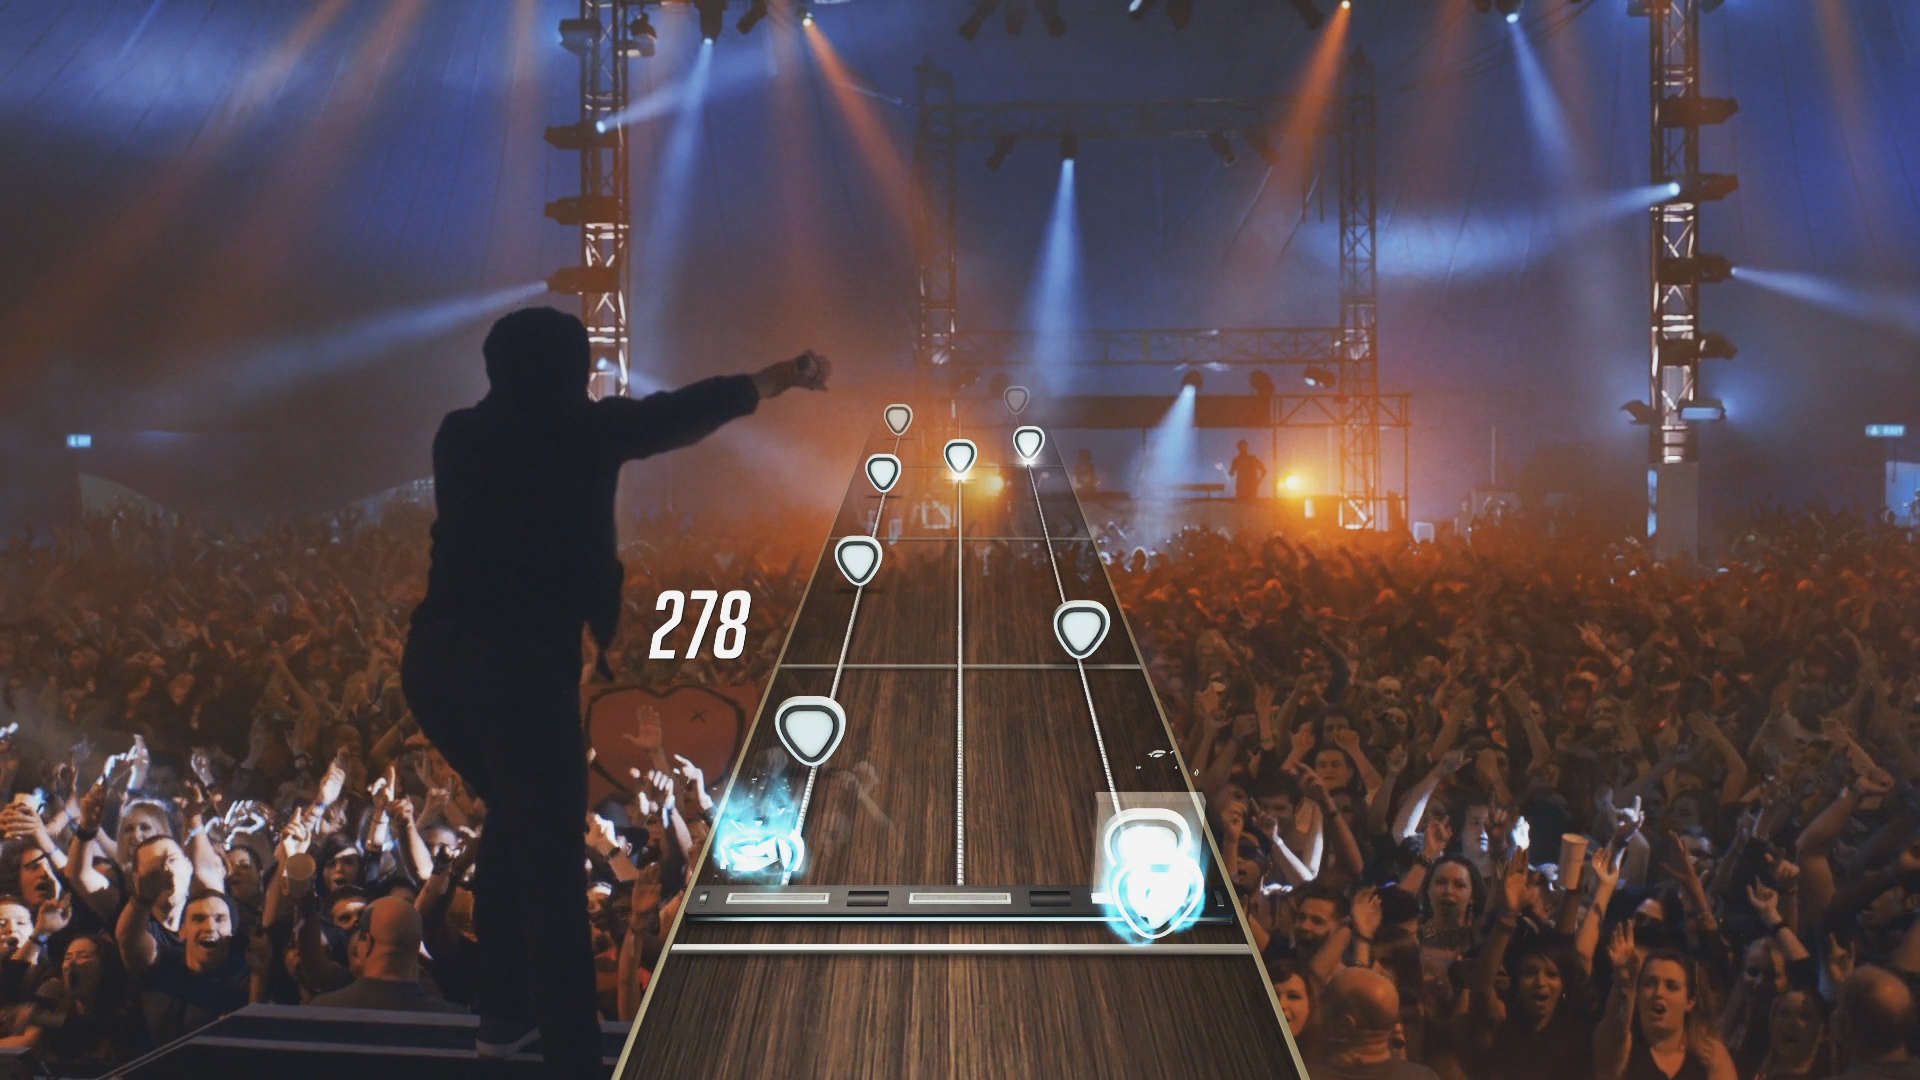 Guitar Hero Live ditches the cartoony look of previous games in the series.